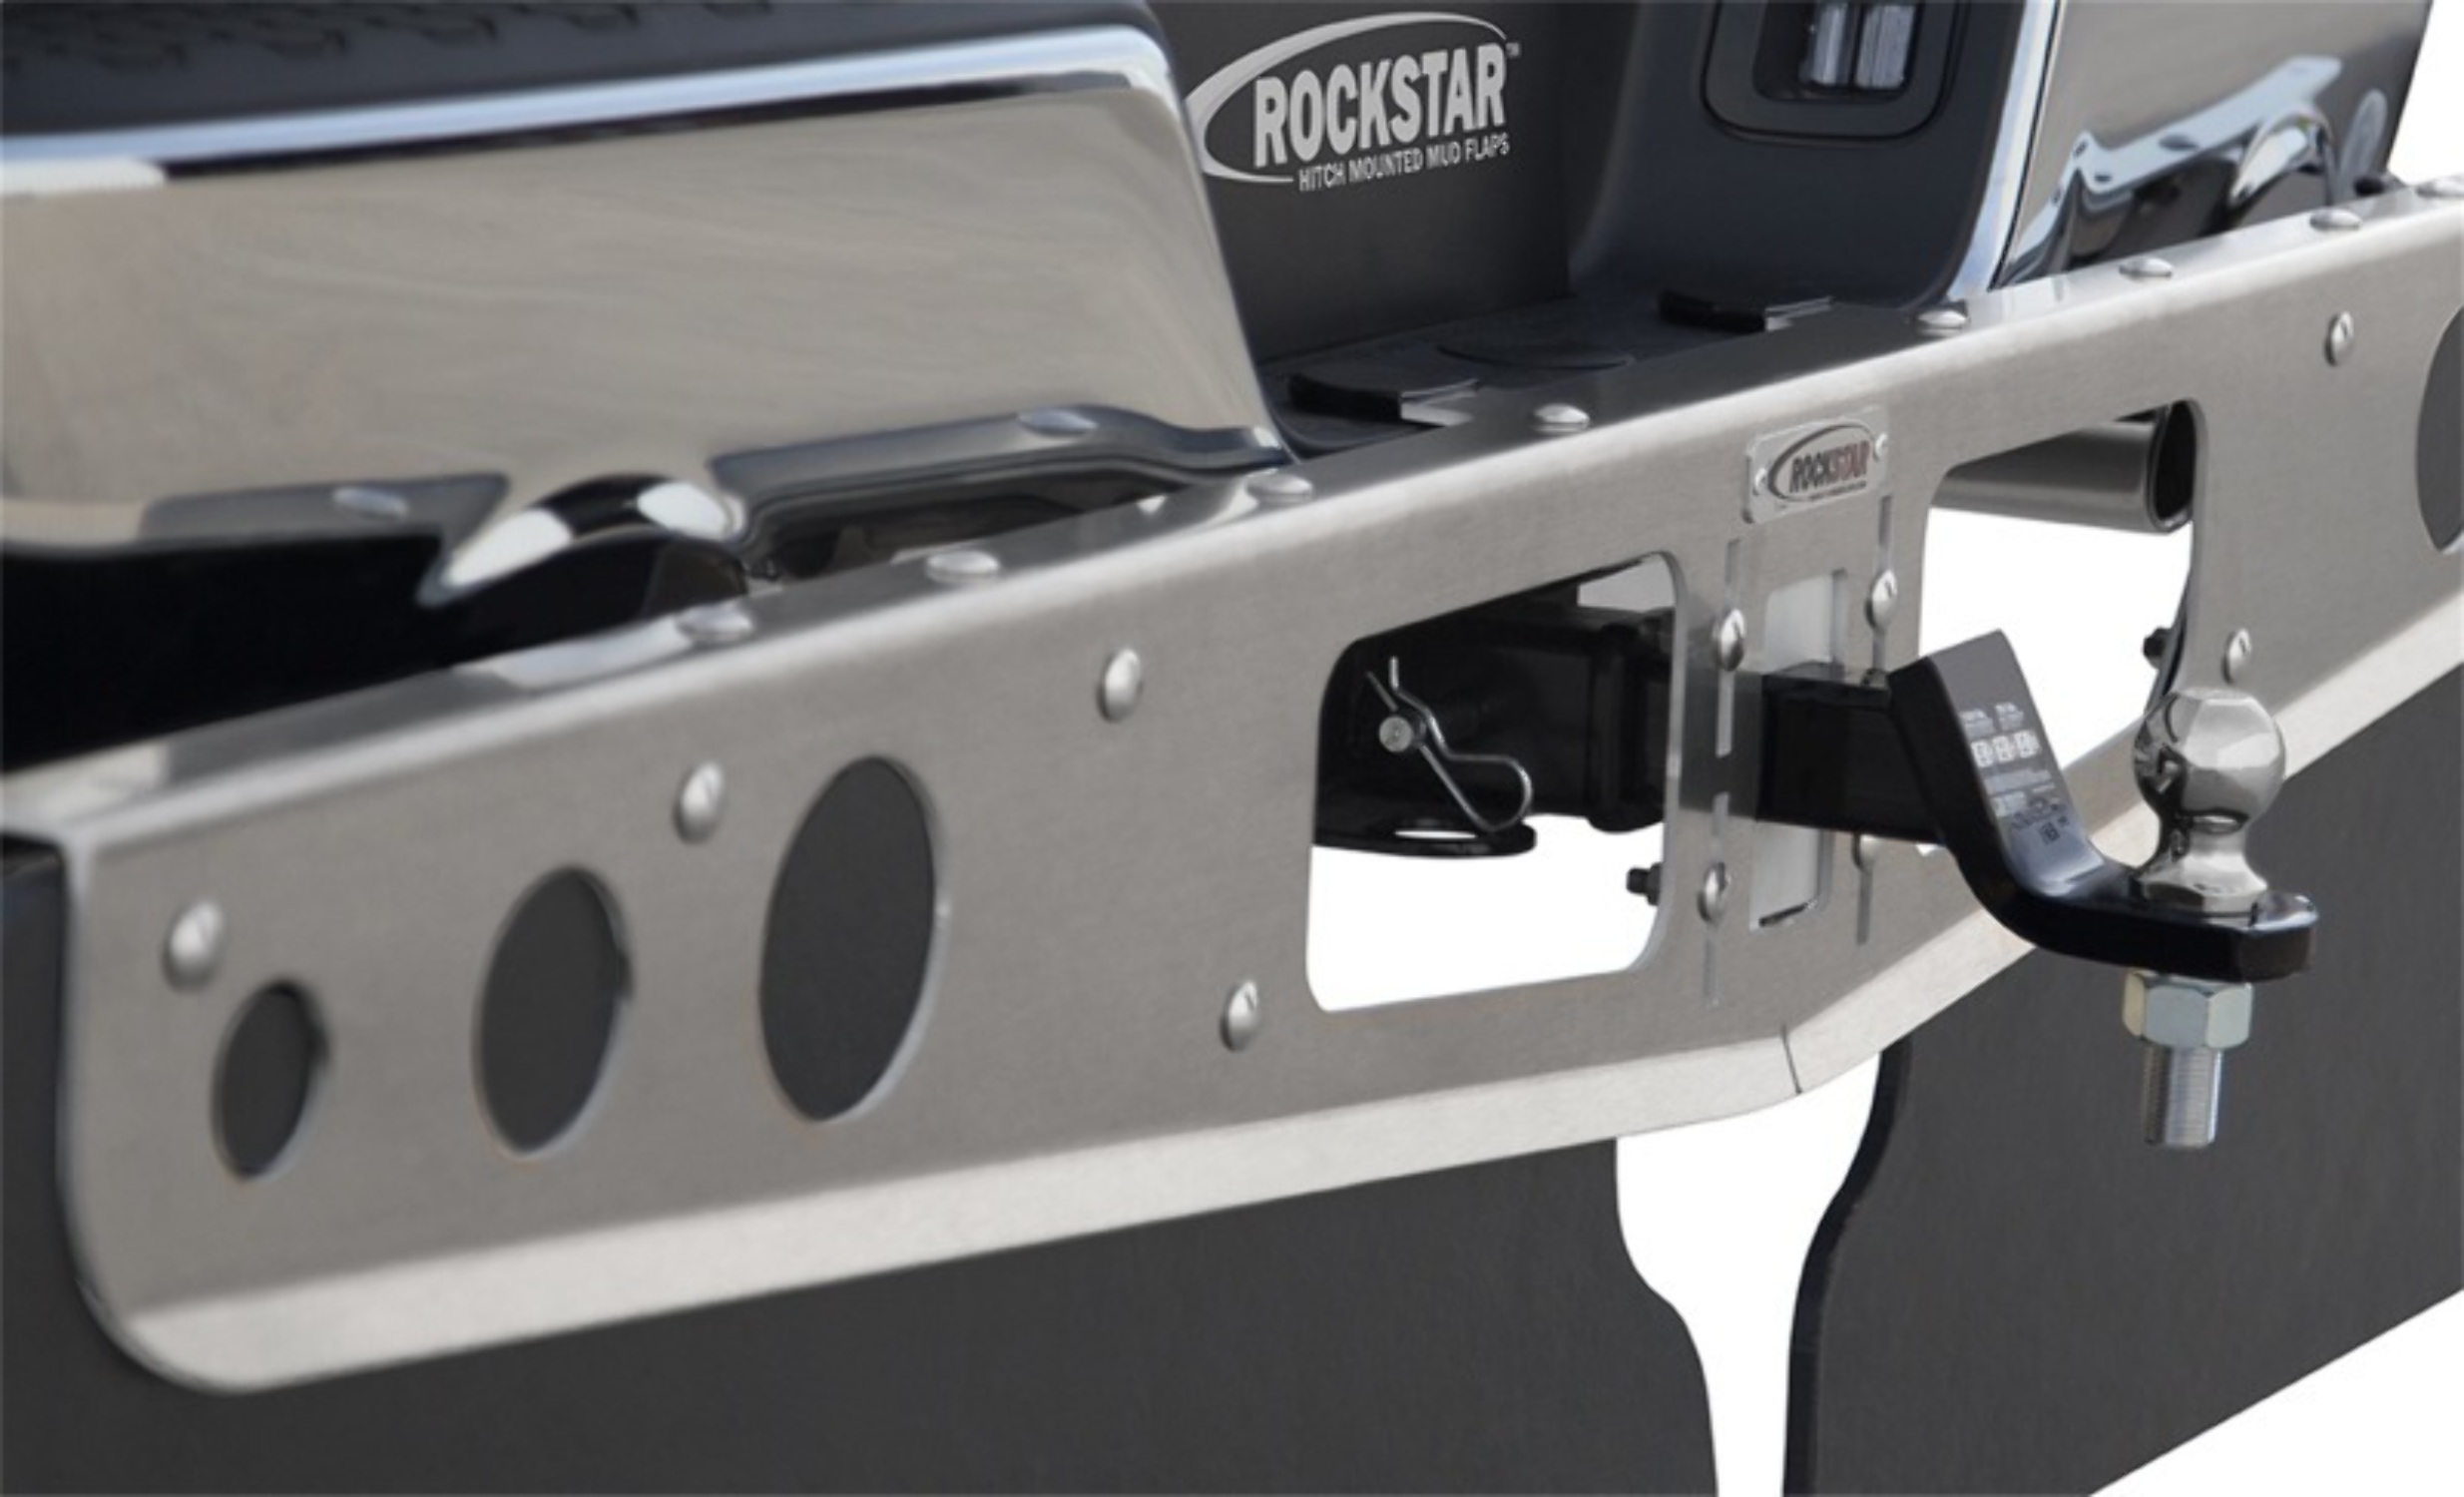 Access Rockstar Hitch Ford Make F - 150 2X Smooth Mill Finish Mounted Mud Flaps Fits select: 2004-2009 FORD F150, 2013-2014 FORD F150 SUPER CAB - image 3 of 10